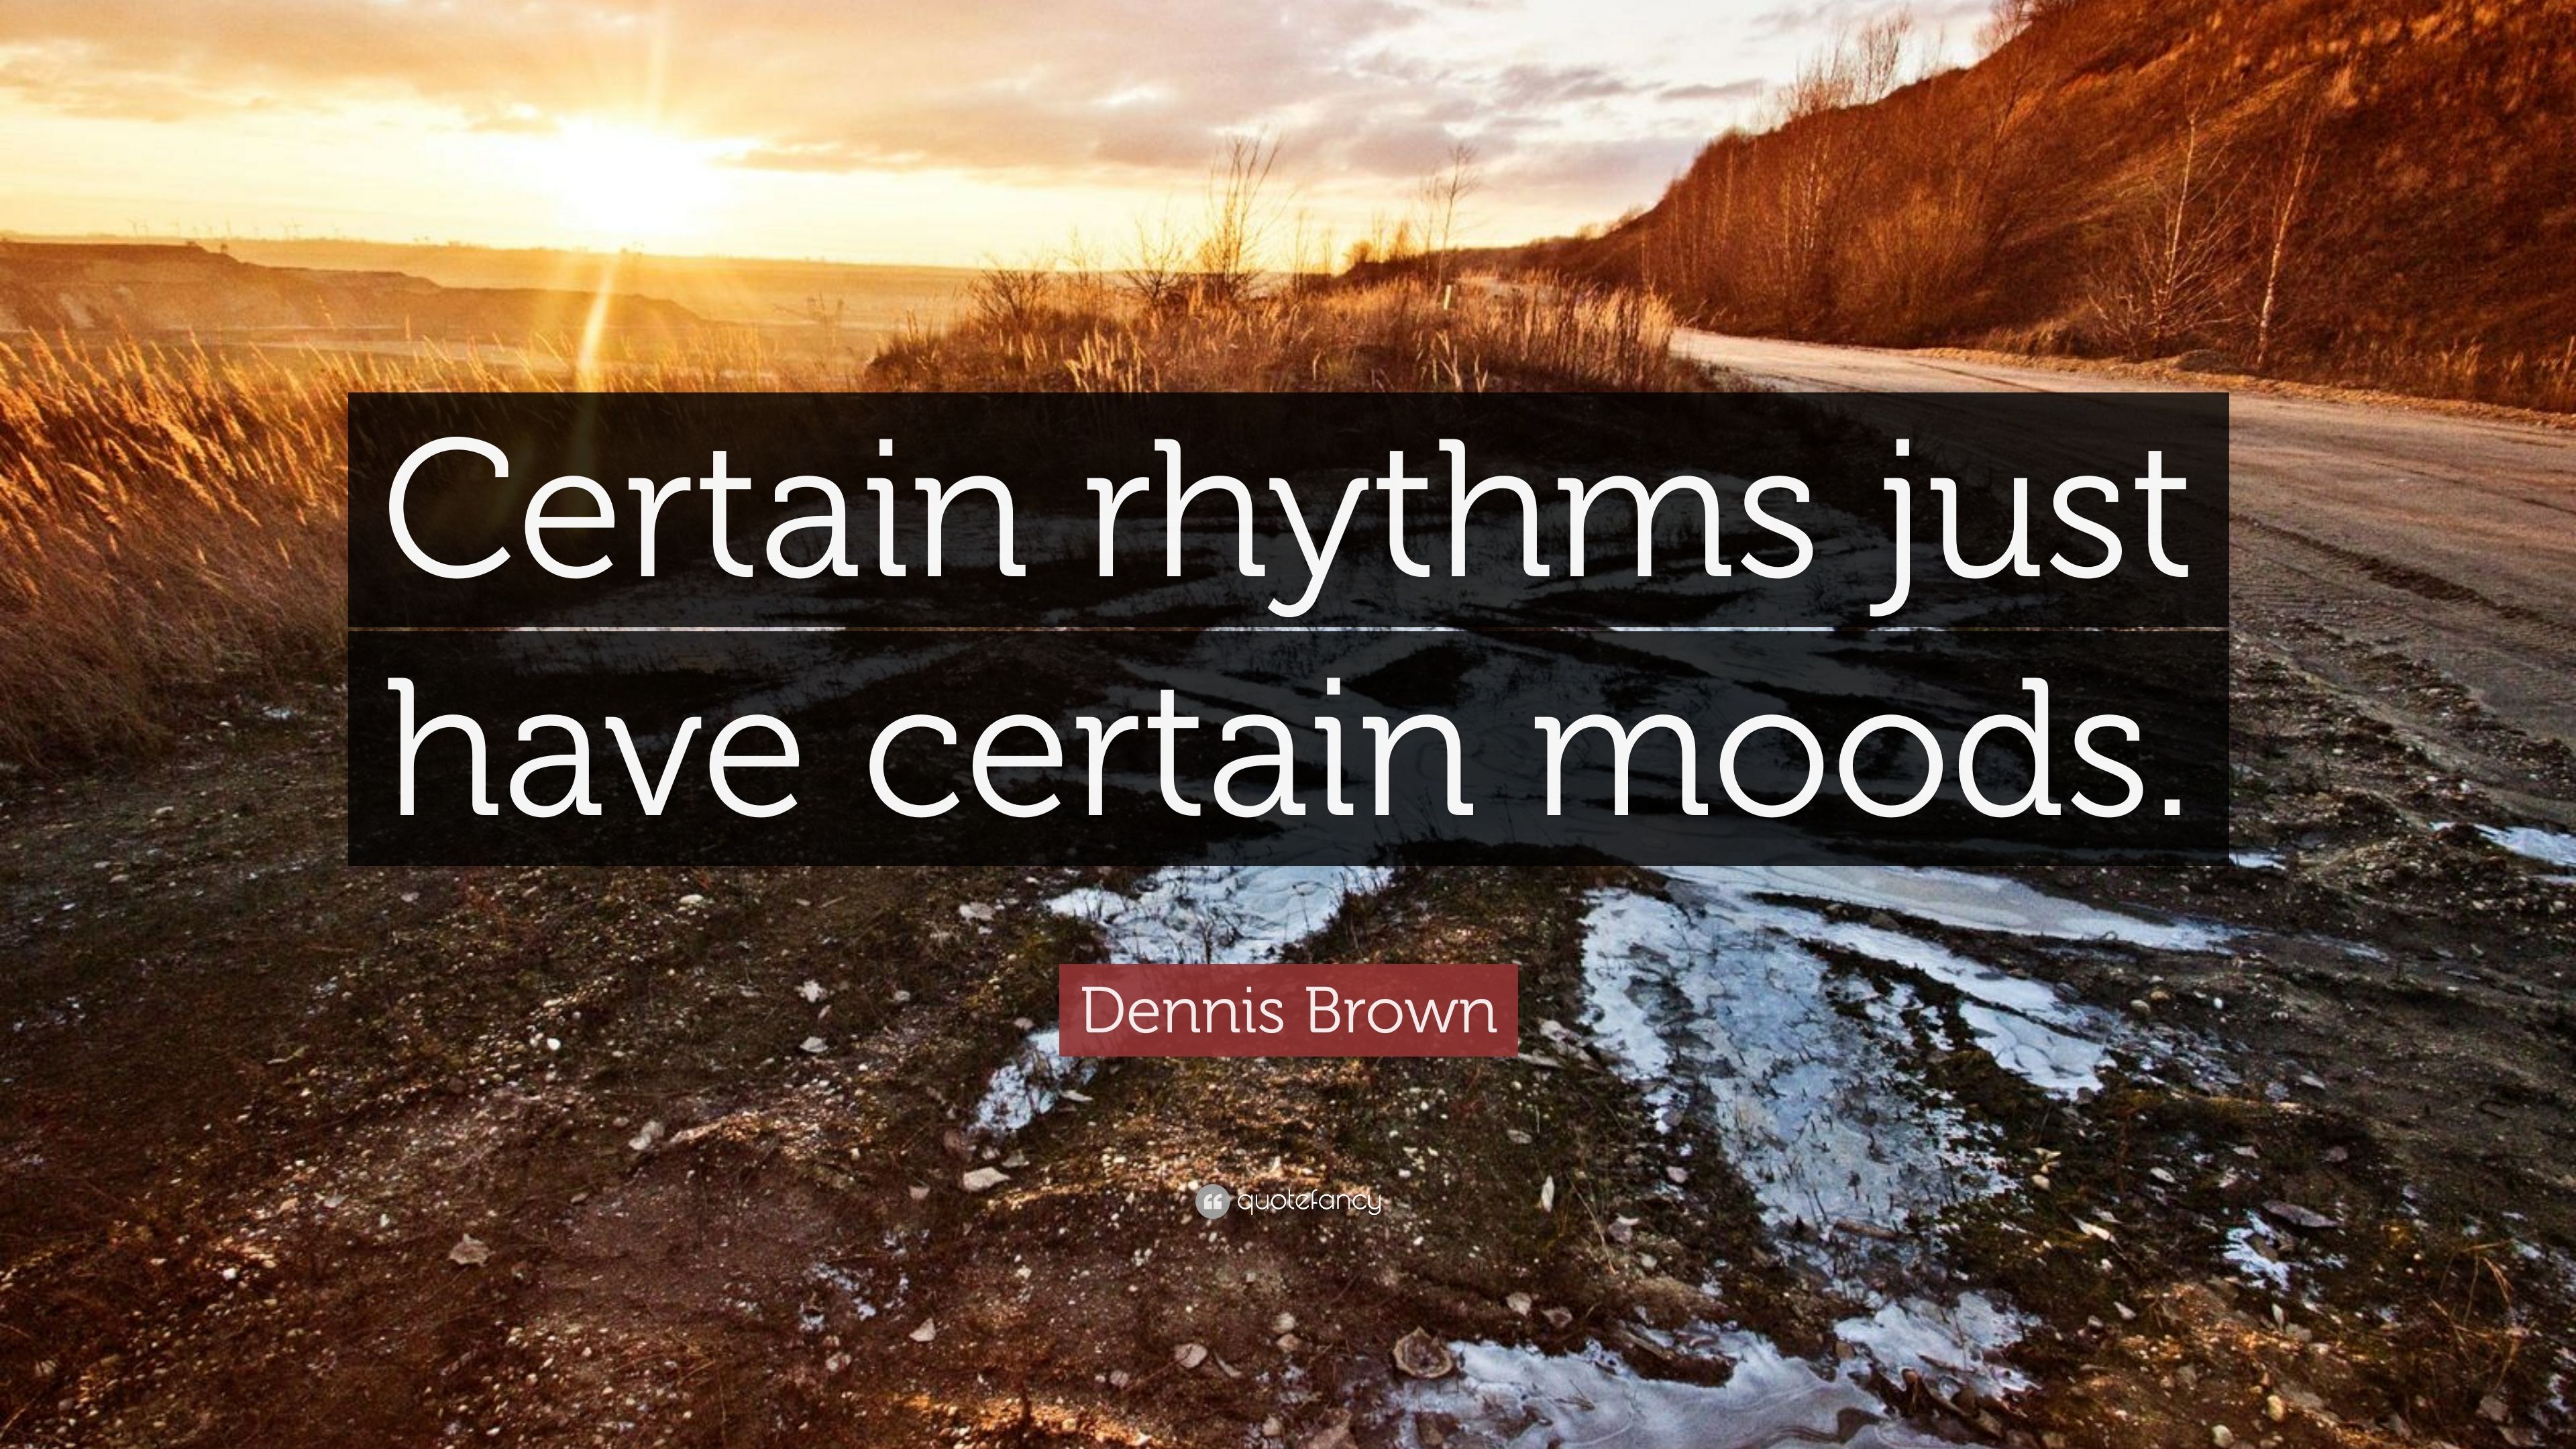 Dennis Brown Quote: “Certain rhythms just have certain moods.” 7